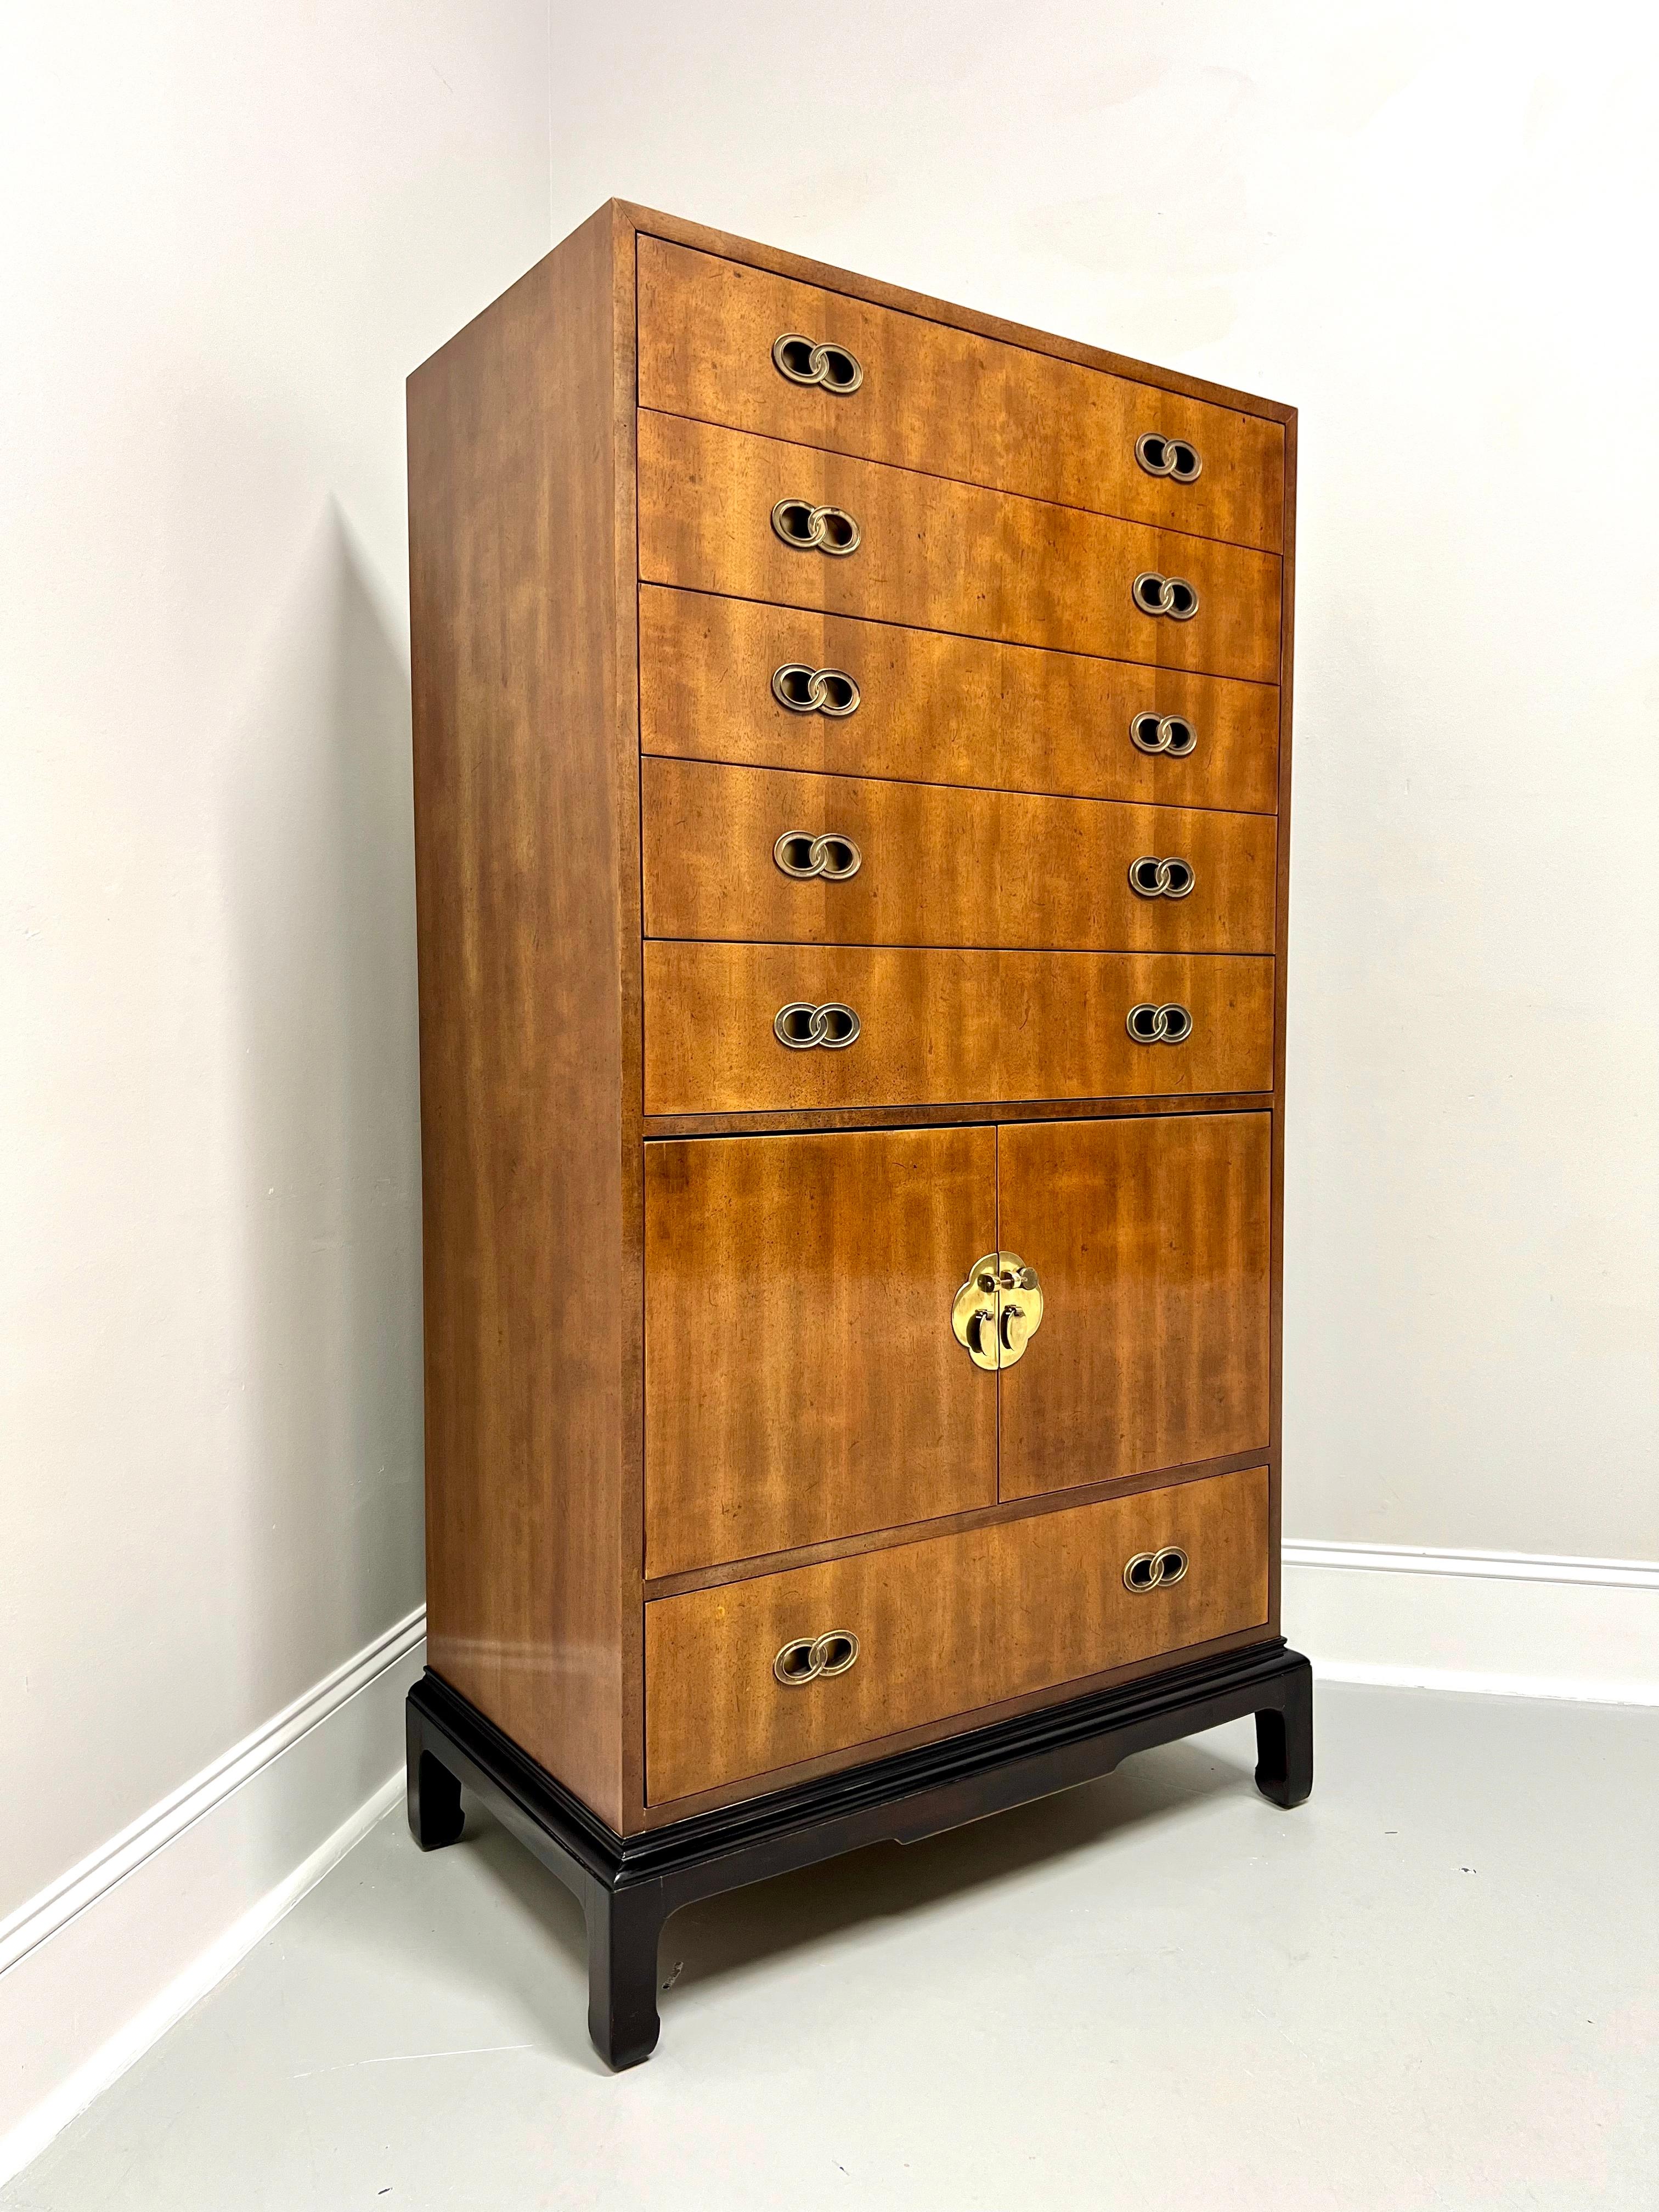 An Asian inspired chest of drawers designed by Michael Taylor for Henredon. Mahogany with a slightly distressed finish, decorative brass hardware, square edge to top, Ming design black lacquered base with curved inward square legs. Features five